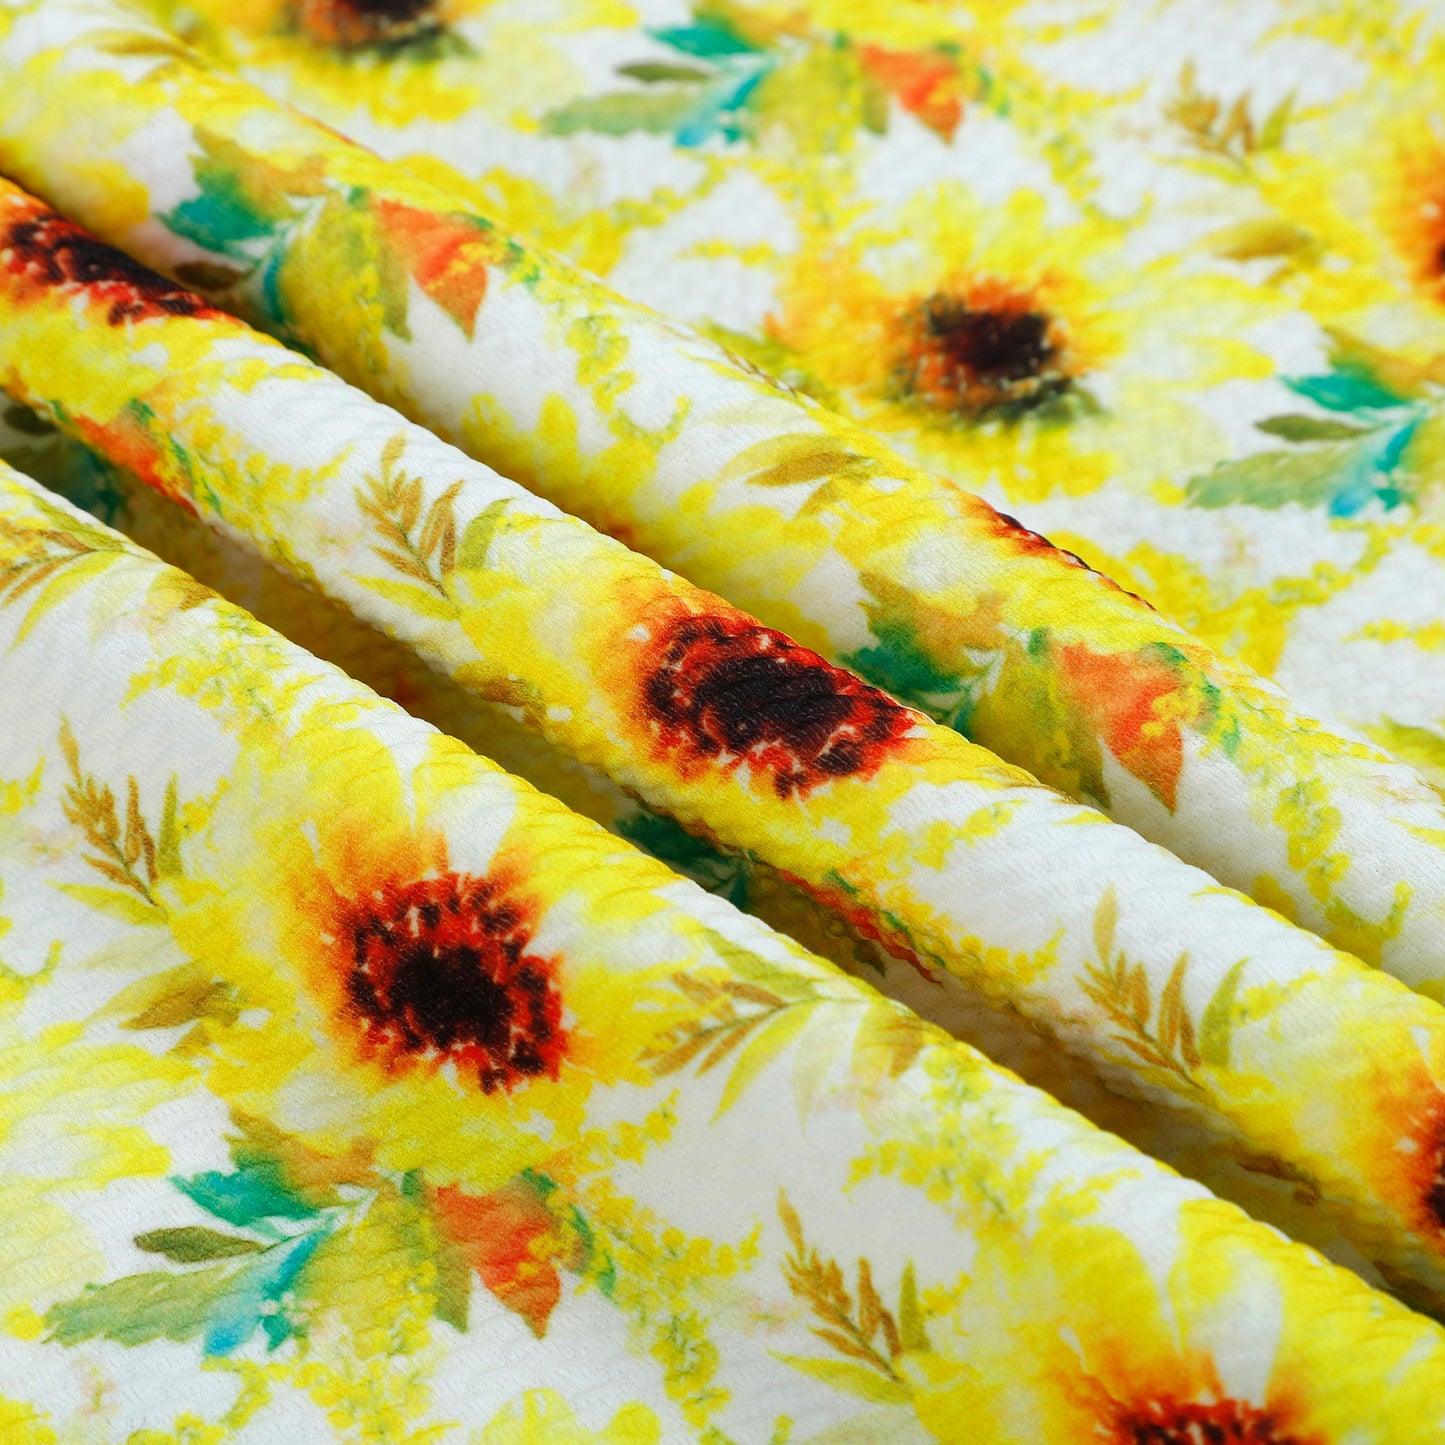 Bullet Textured Fabric  Sunflowers (F13)